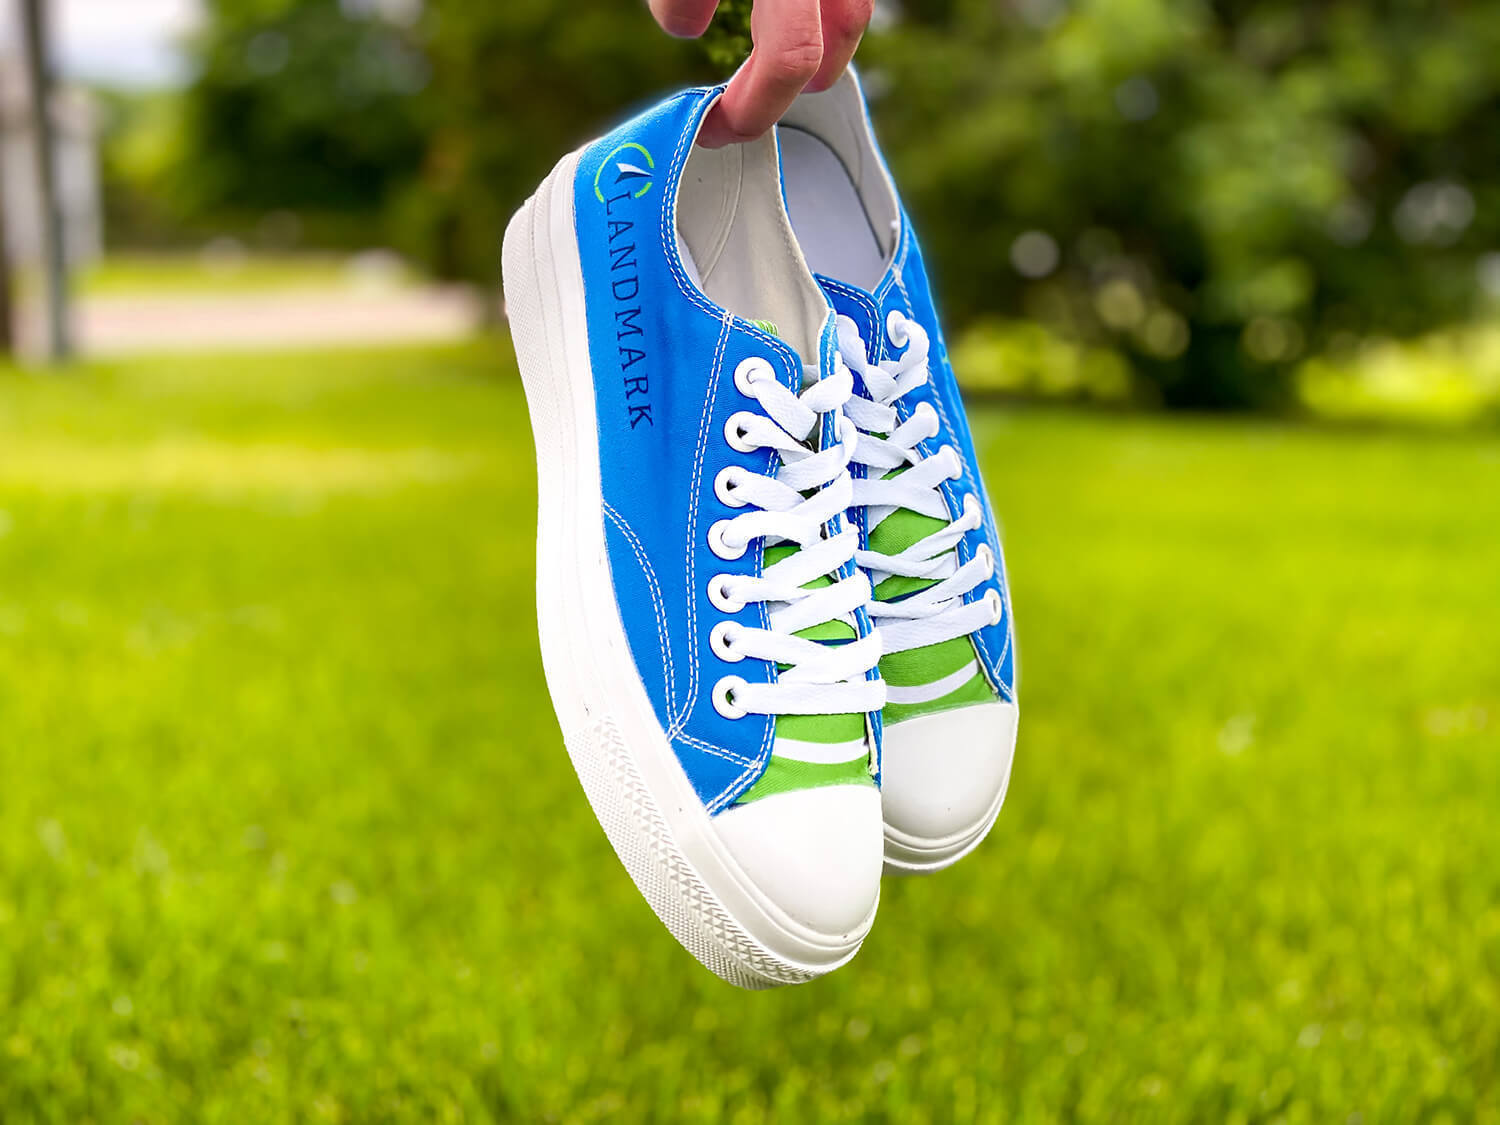 Custom Branded Sneakers and Shoes: The Latest Promotional Trend